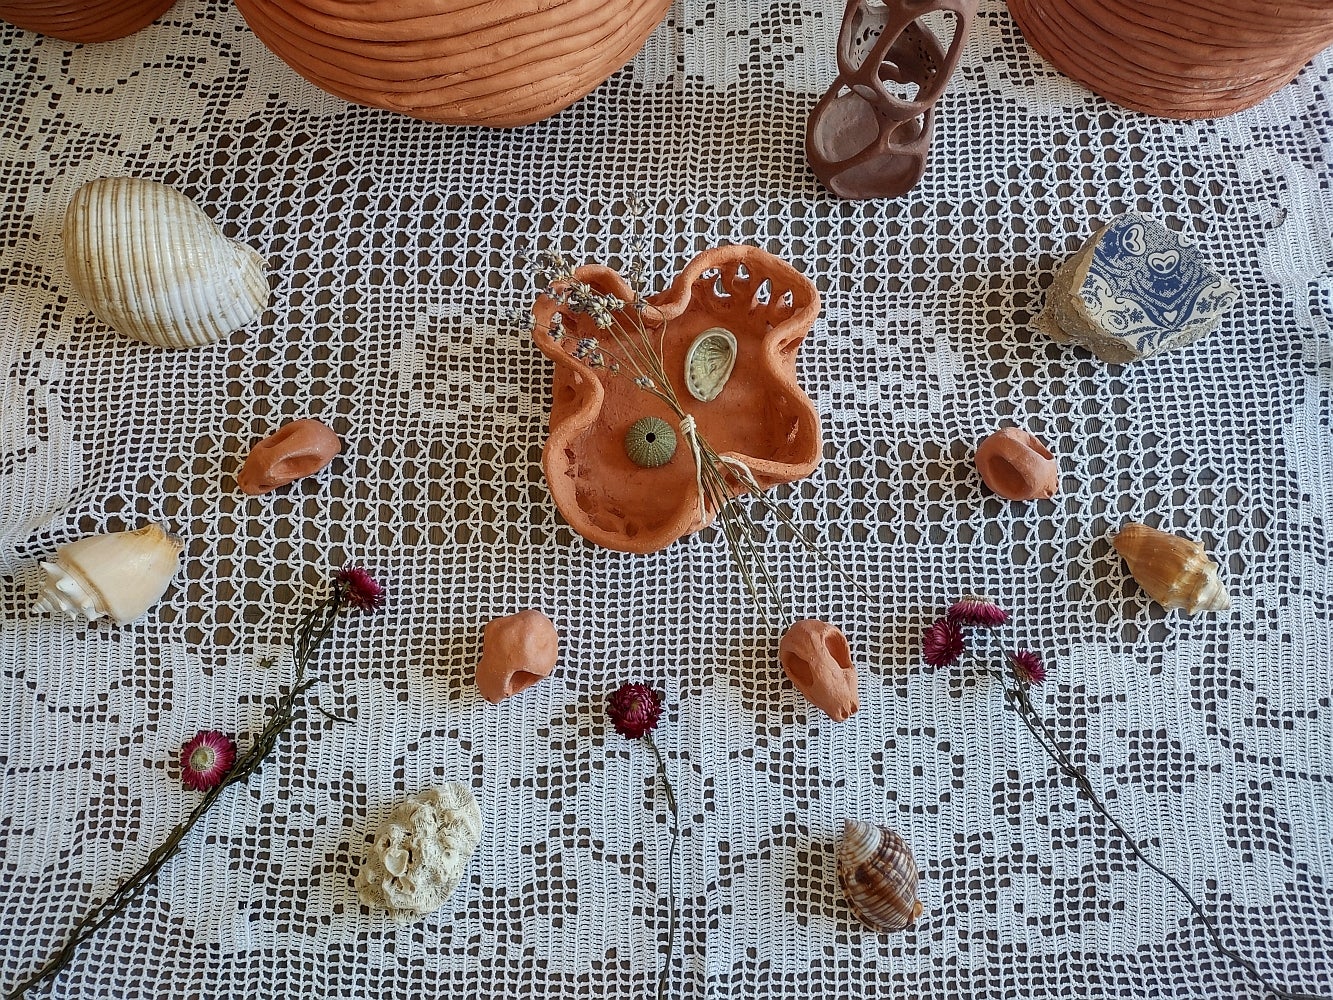 Collection of items including clay vessels, clay skull-like objects, dried flowers and shells sit on the floor on a crocheted t